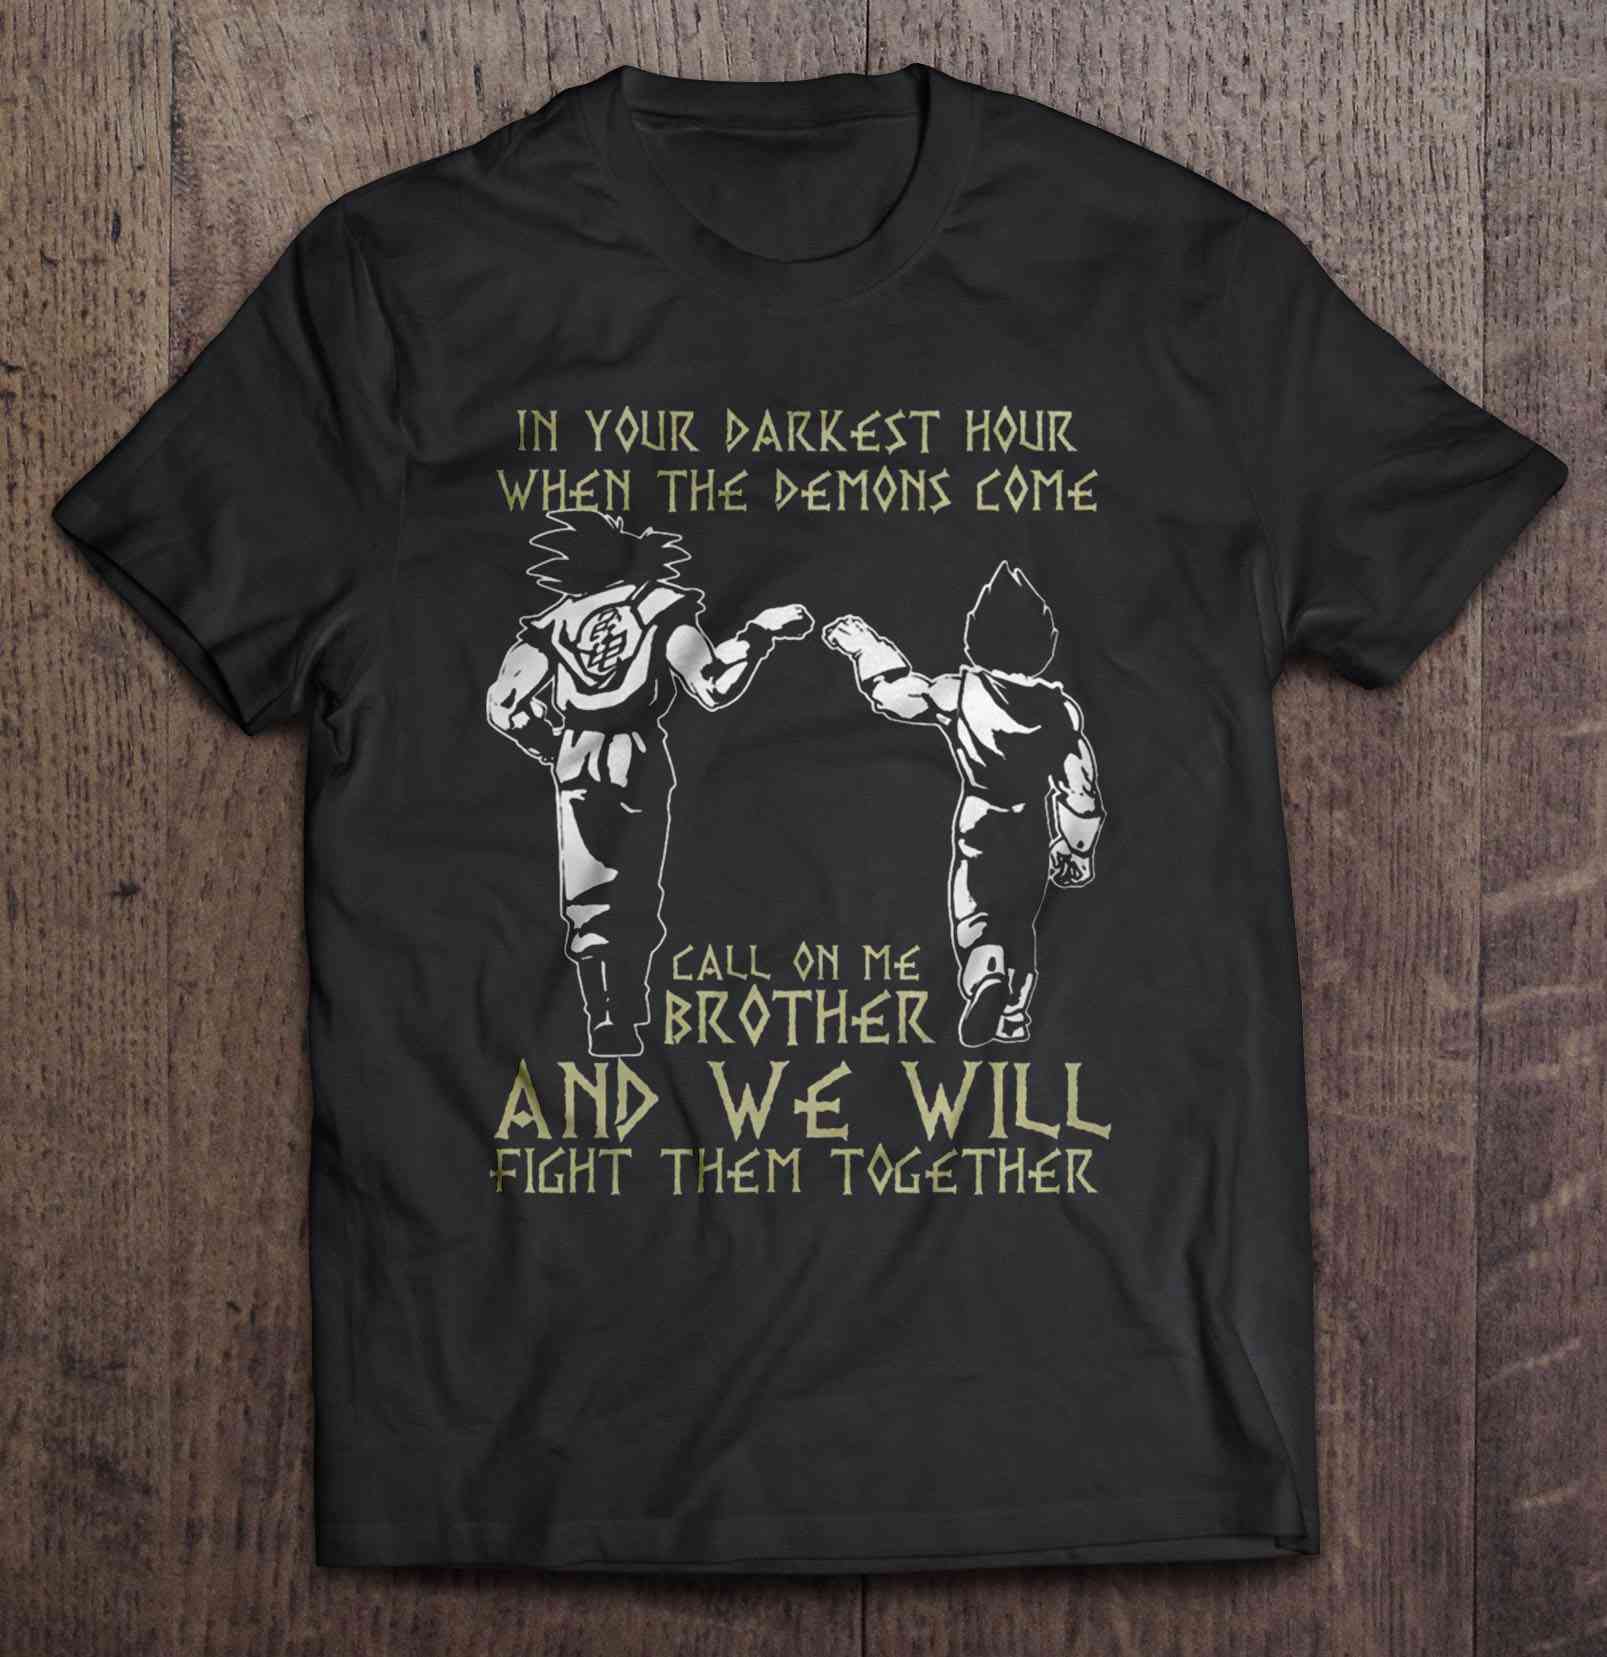 In Your Darkest Hour - Seven Balls T-shirt and Hoodie 0123